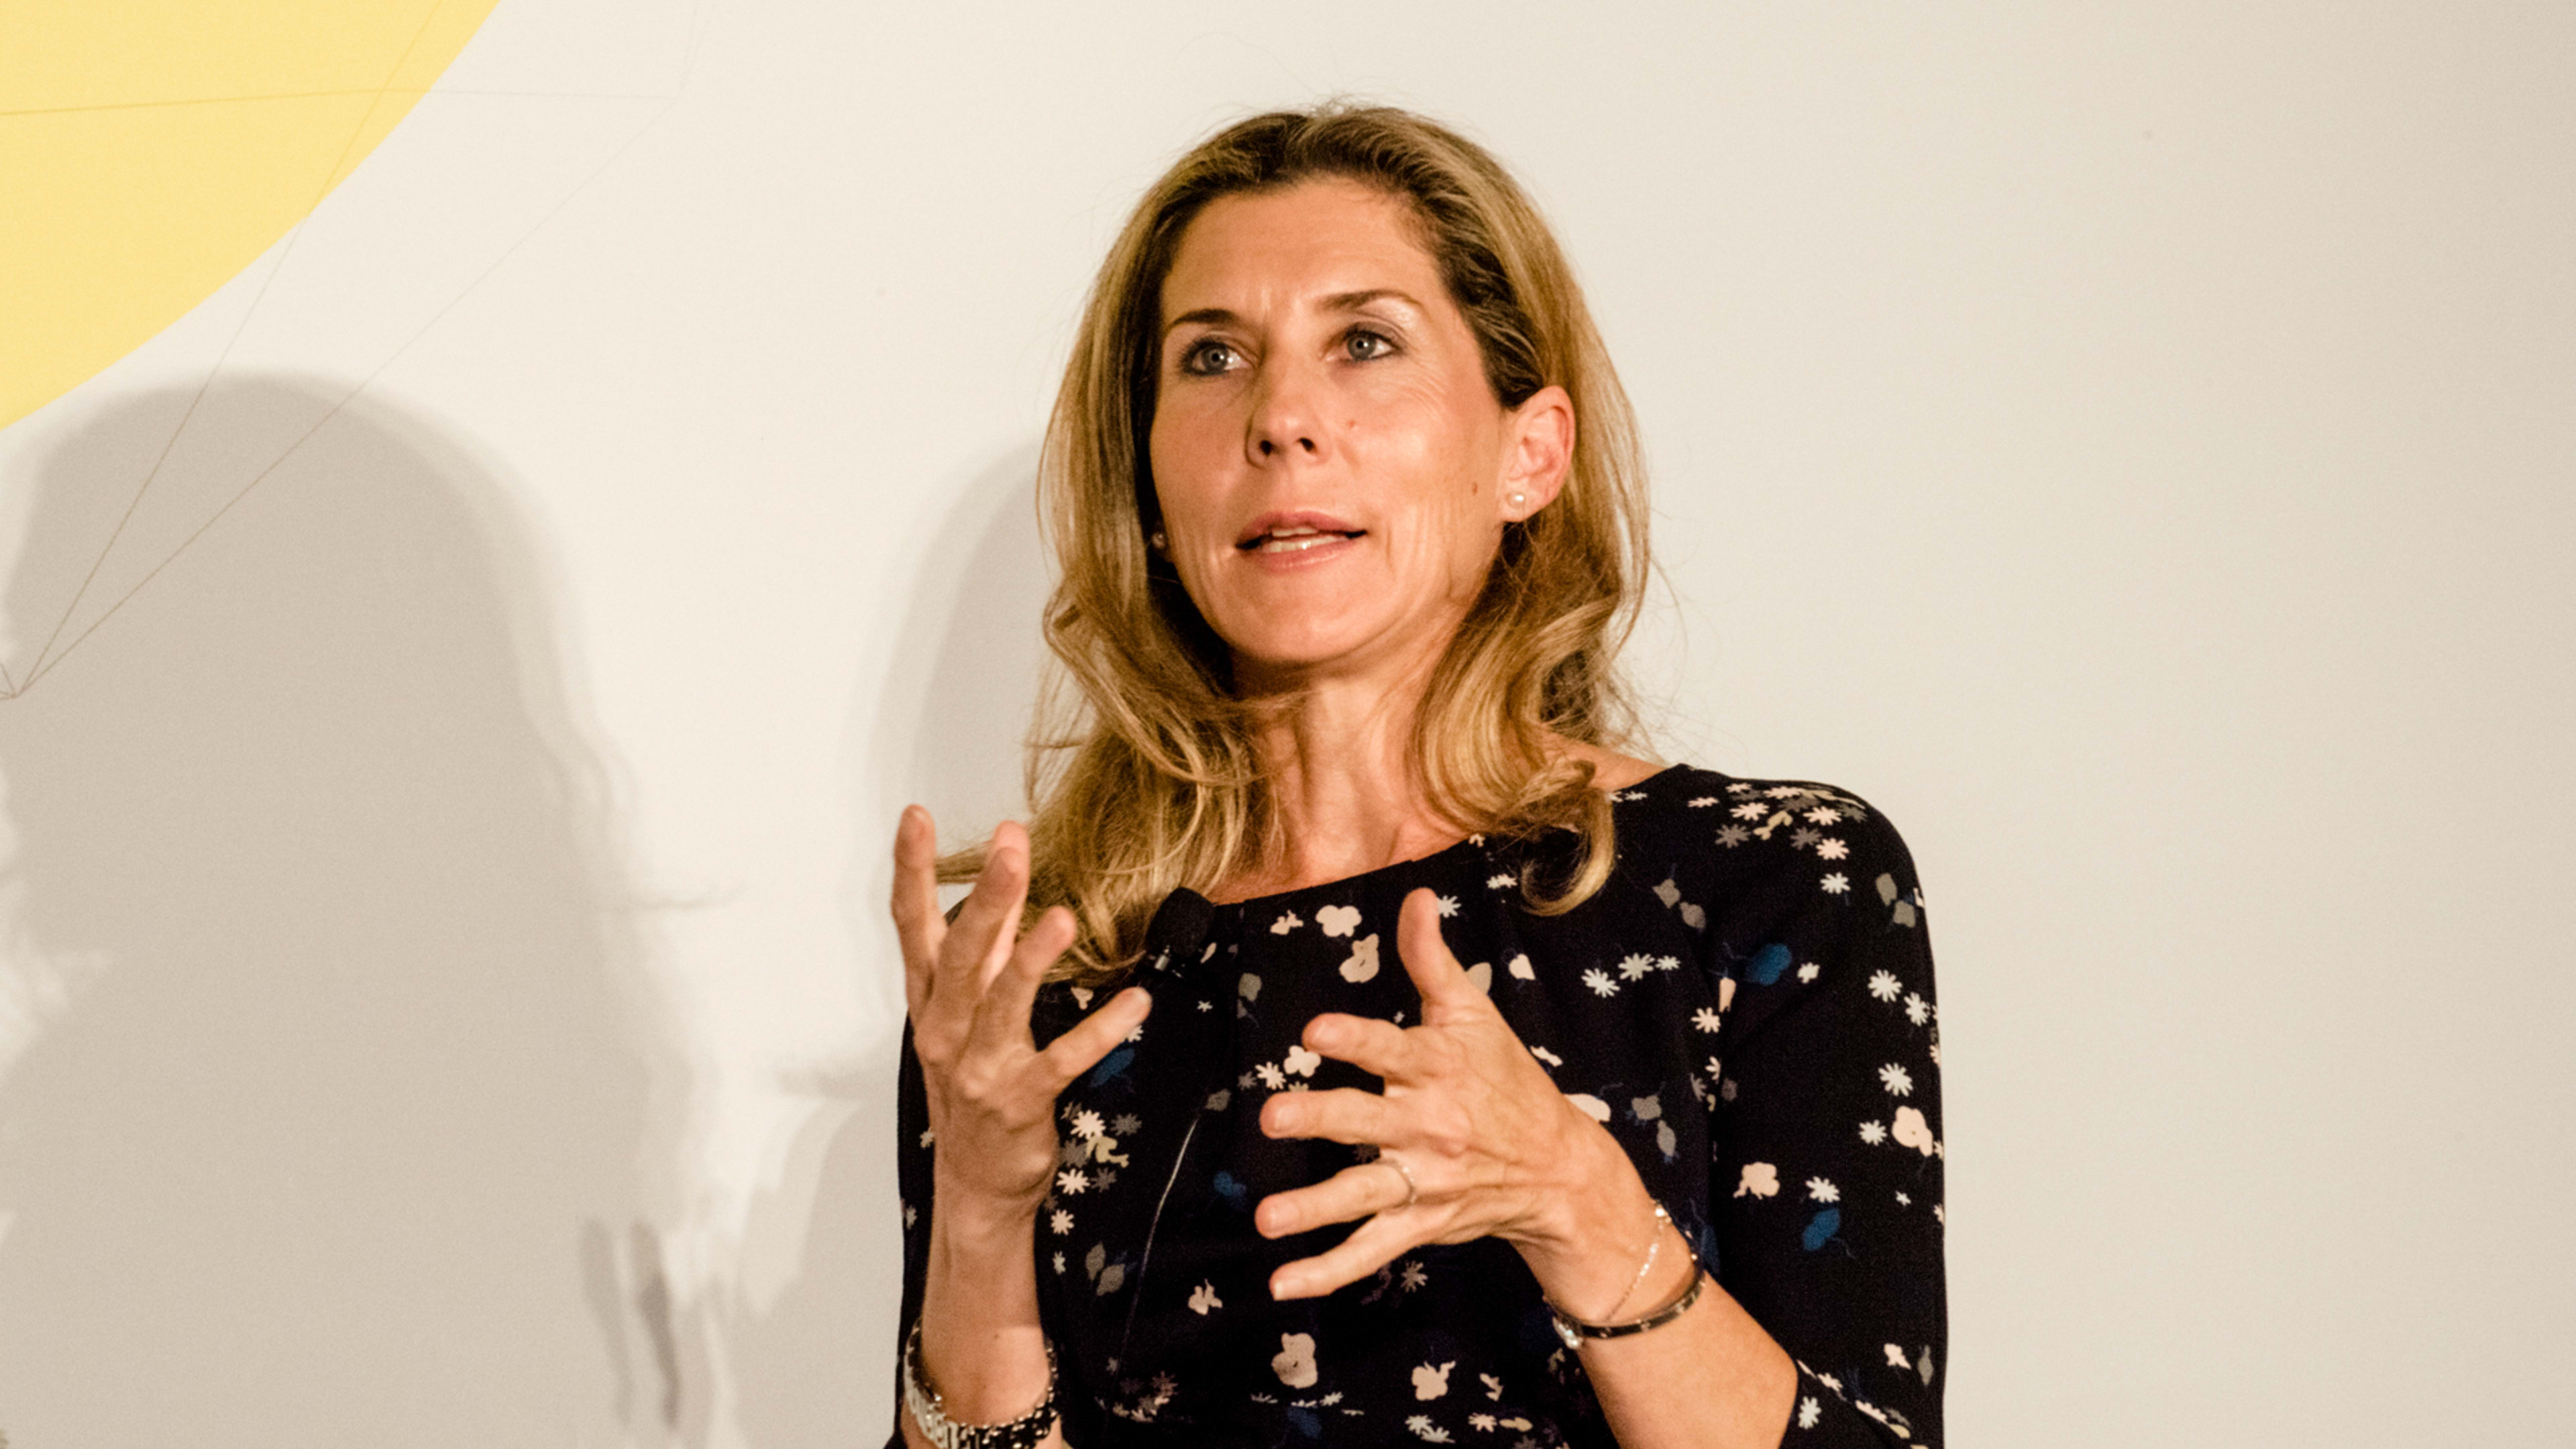 A wiser Monica Seles tells her younger self to chill–It’s just tennis, not life